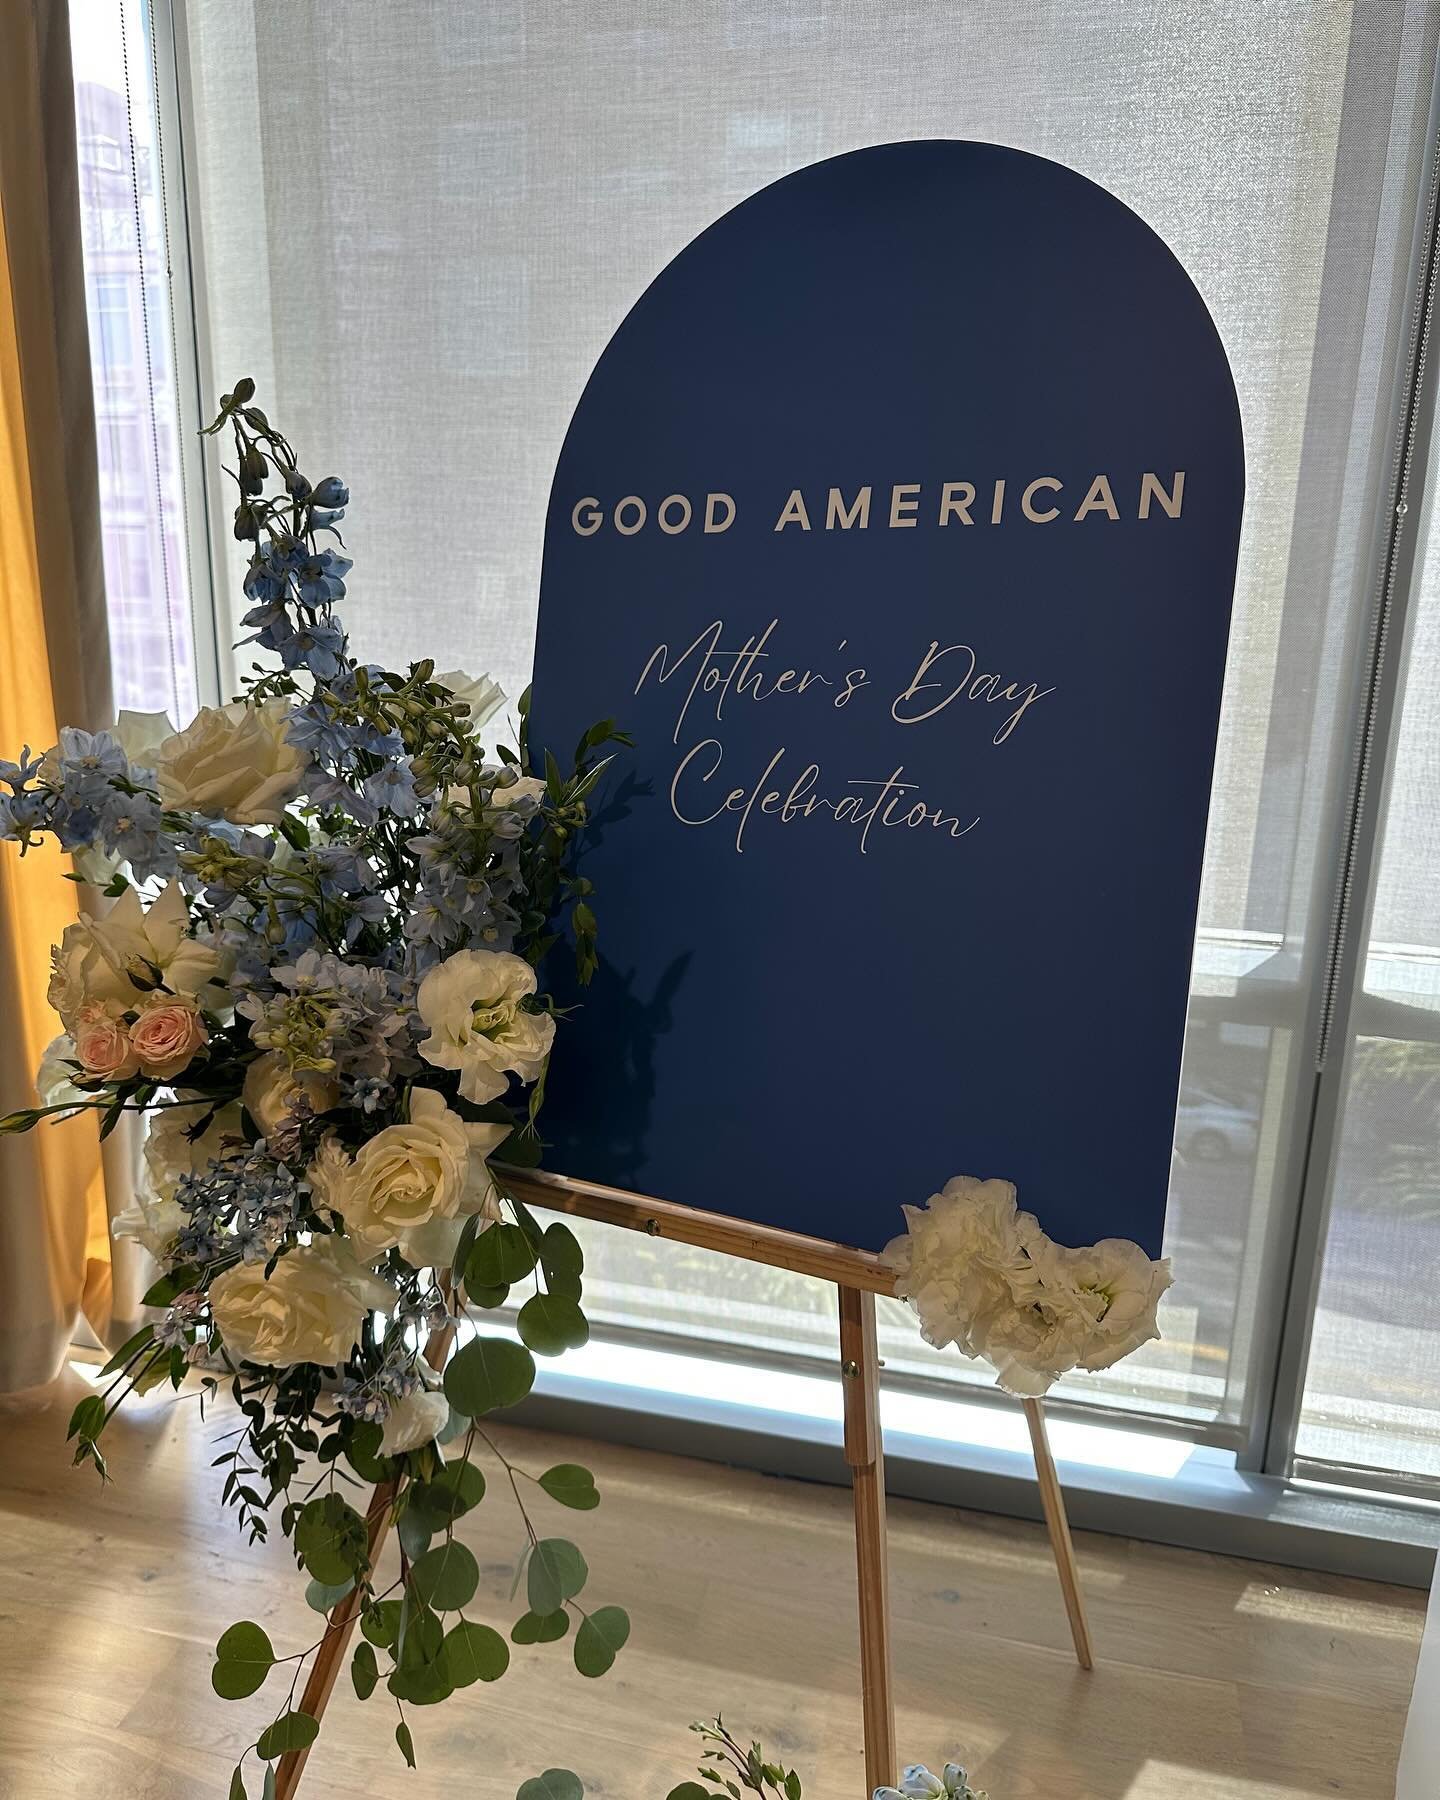 Spending an early morning for #MothersDay with @goodamerican was pretty special! (And delicious, and fragrant, and and and&hellip;)

Thanks @sayang.market for doing it all, big or small.

#thewotp #wifeoftheparty #goodamerican #mothersday #bts